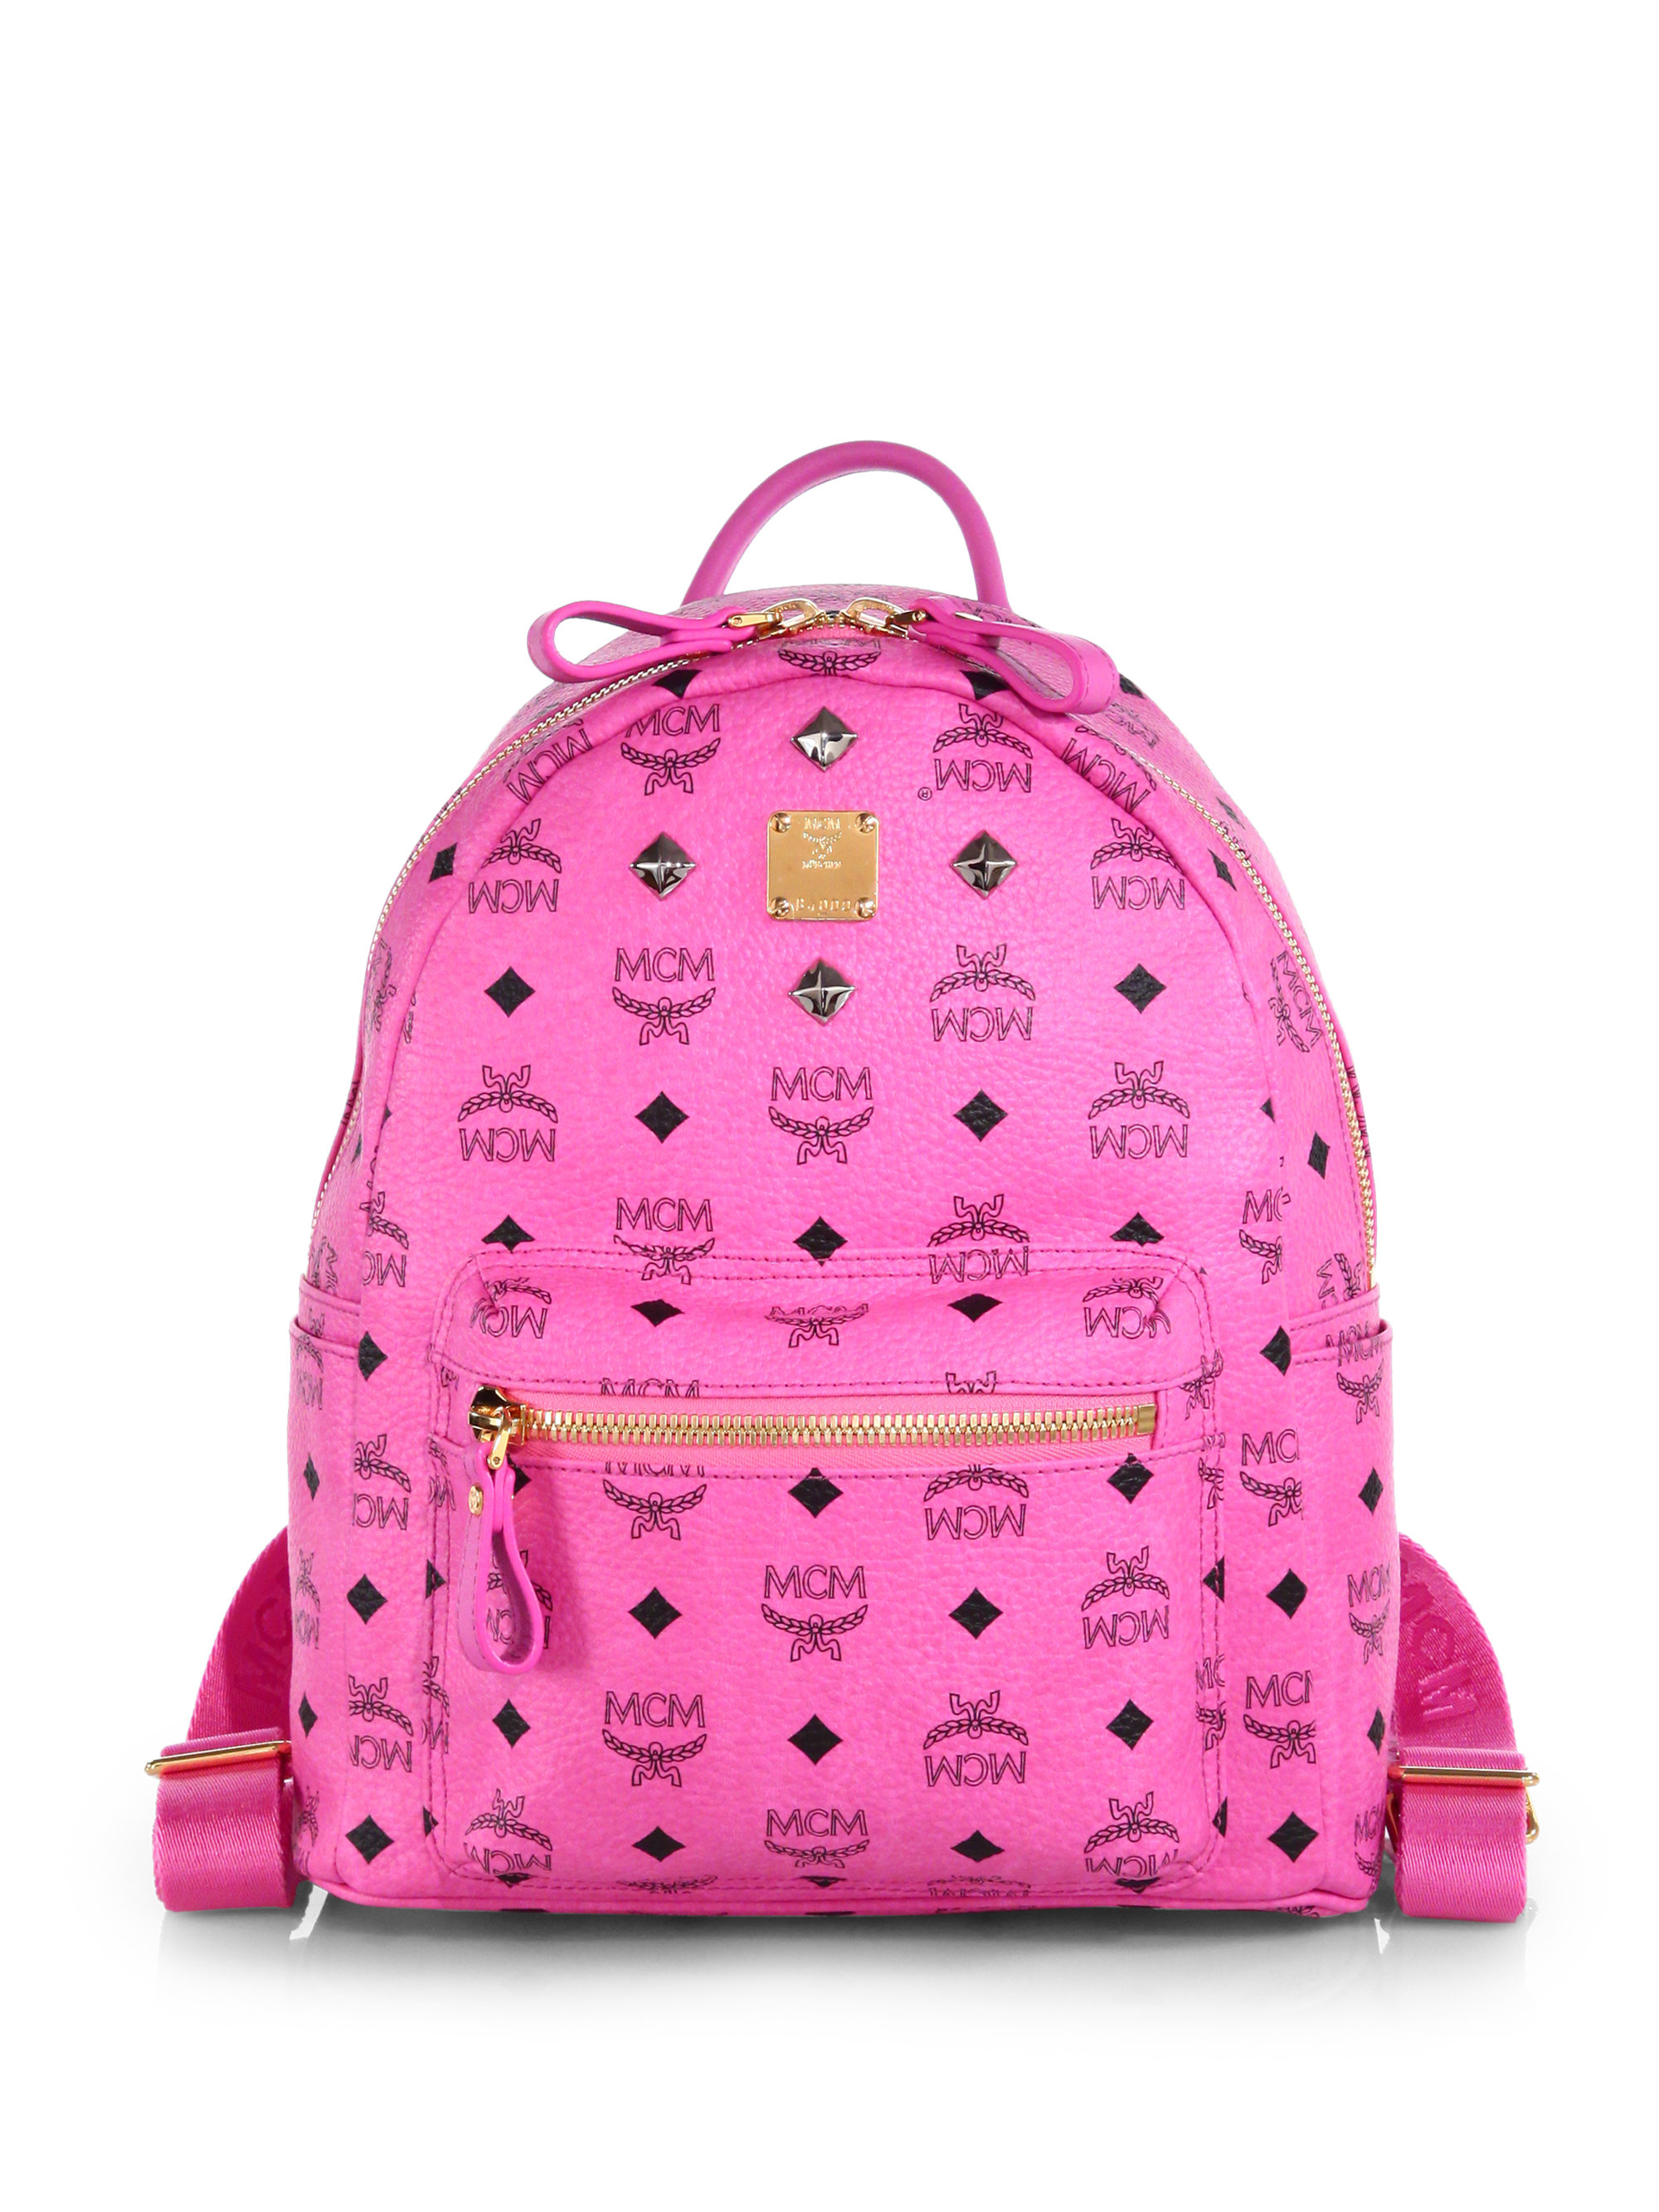 Lyst - Mcm Stark Sprinkle Stud Small Coated Canvas Backpack in Pink